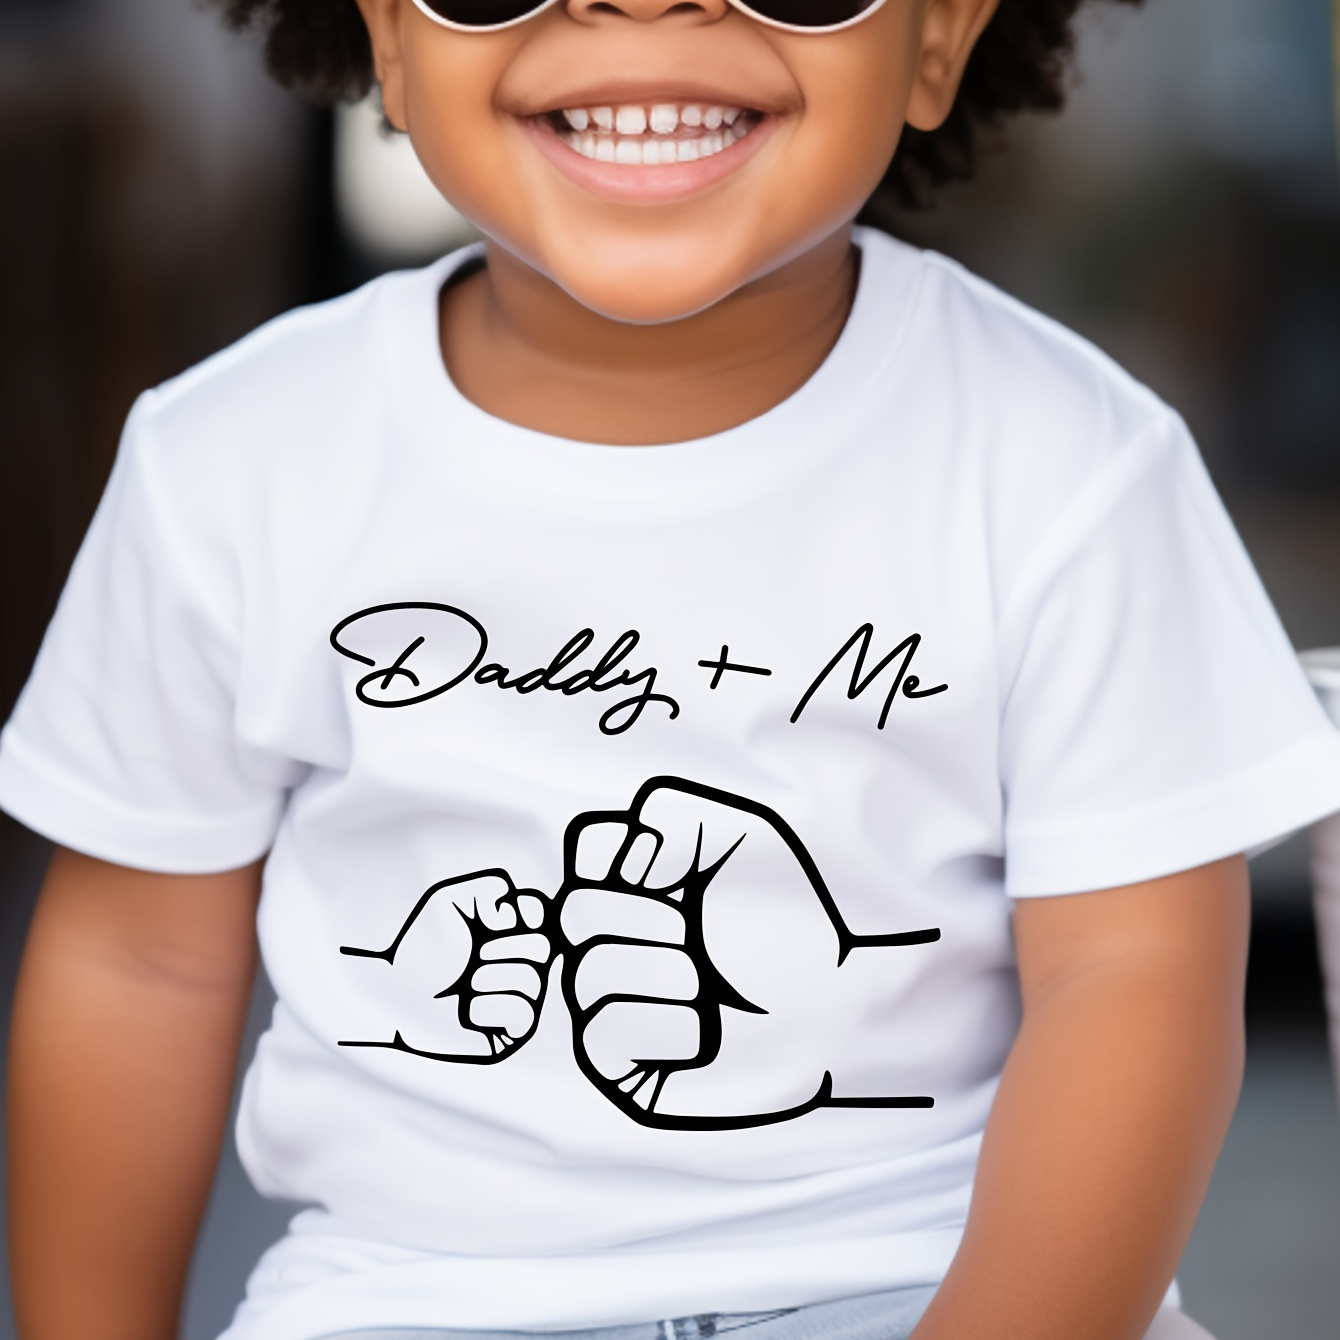 

Daddy + Me Print Boy's Cotton Leisure Short Sleeve Sports T-shirt - Comfortable Summer Outdoor Clothing